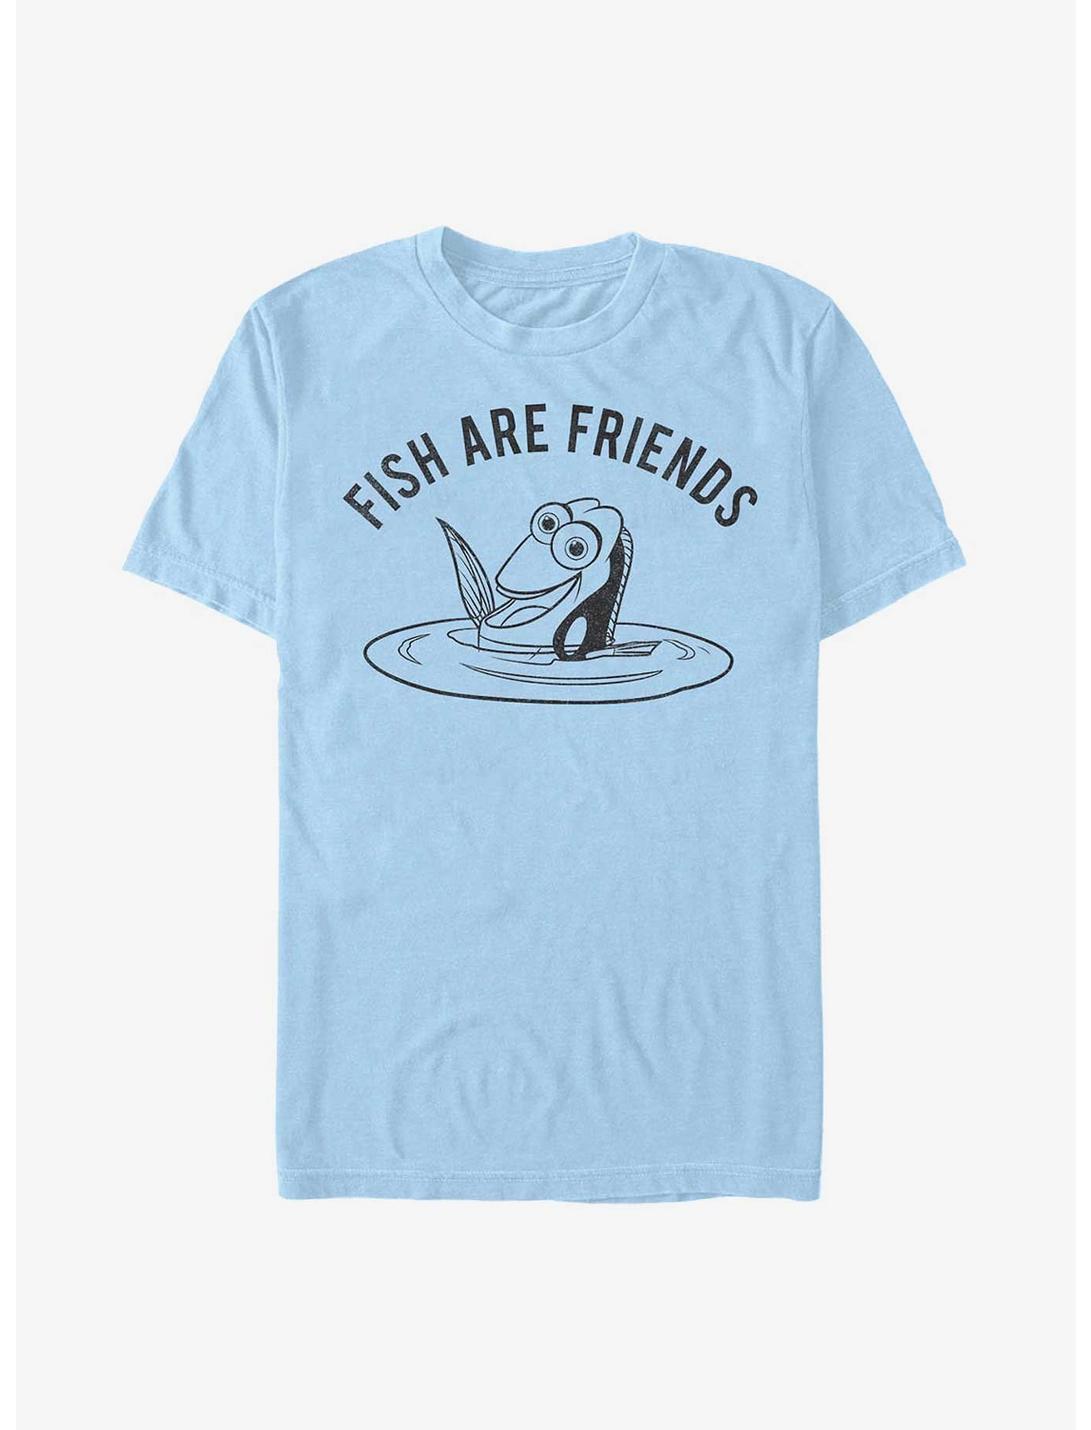 Disney Pixar Finding Nemo Earth Day Dory Fish Are Friends T-Shirt, LT BLUE, hi-res